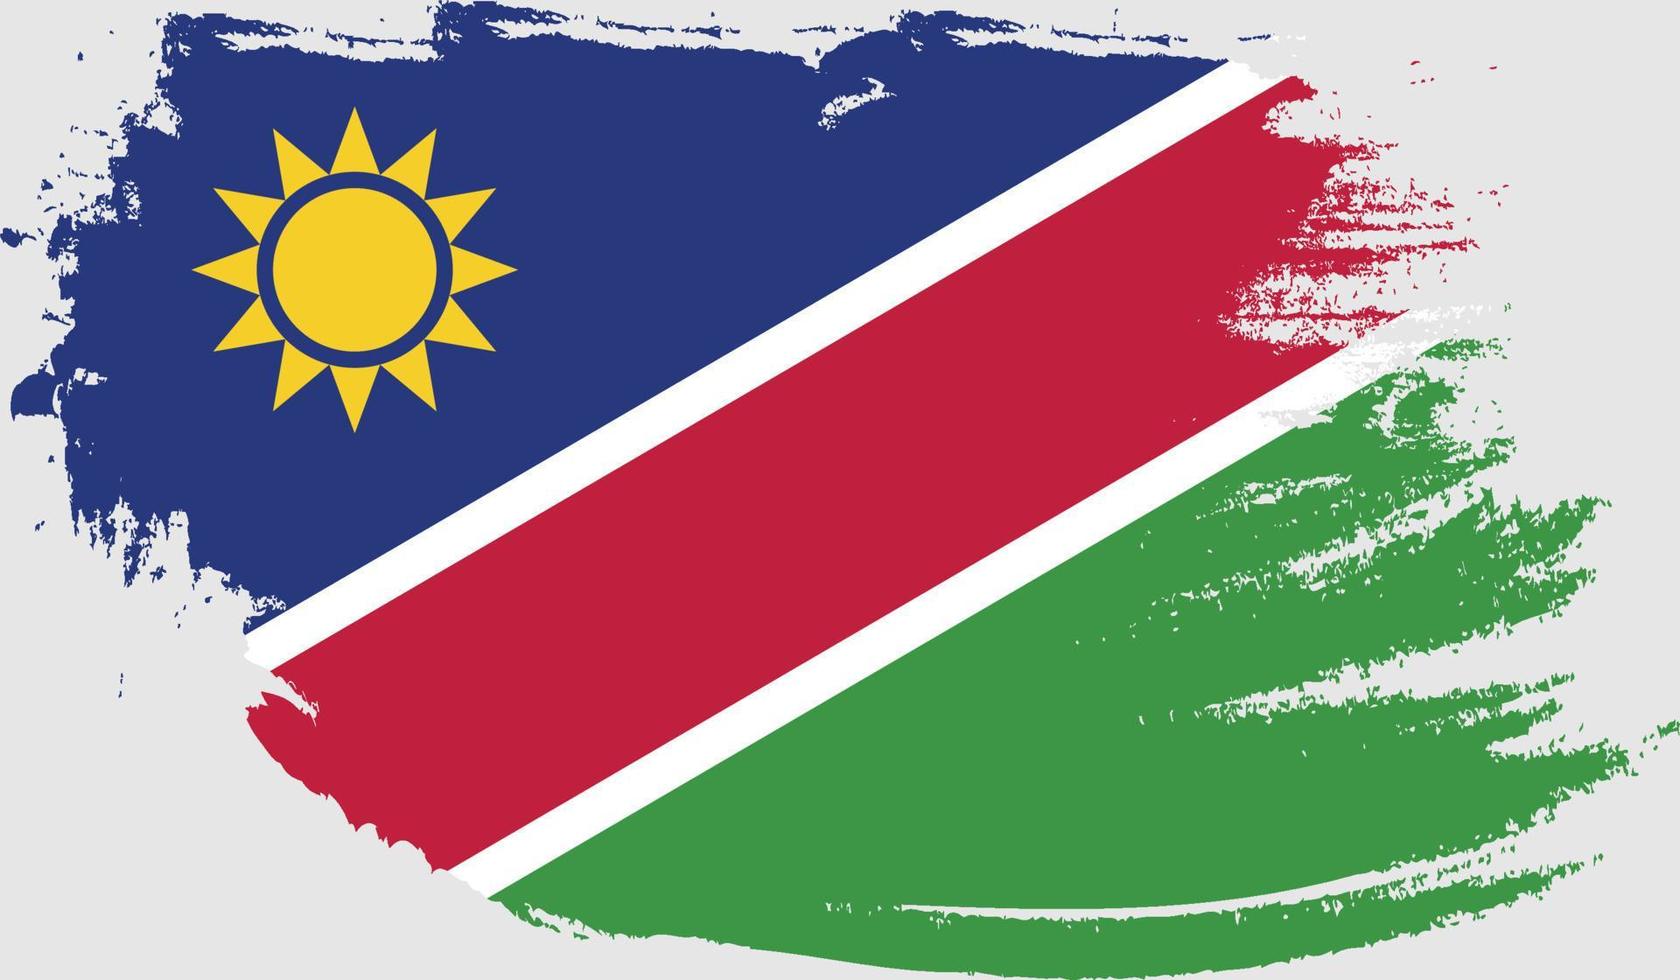 Namibia flag with grunge texture vector